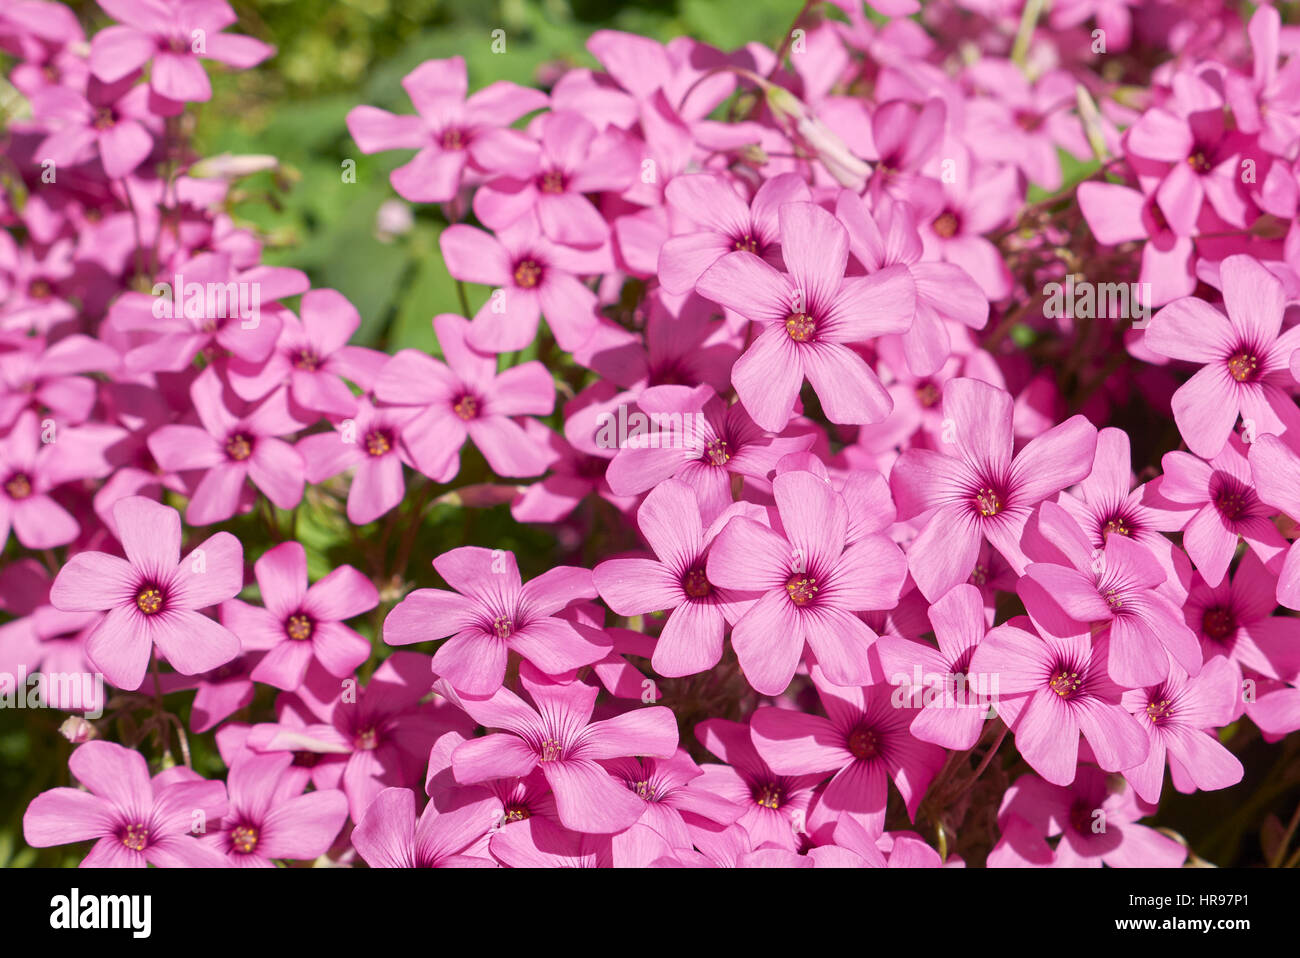 Oxalis articulate close up Stock Photo